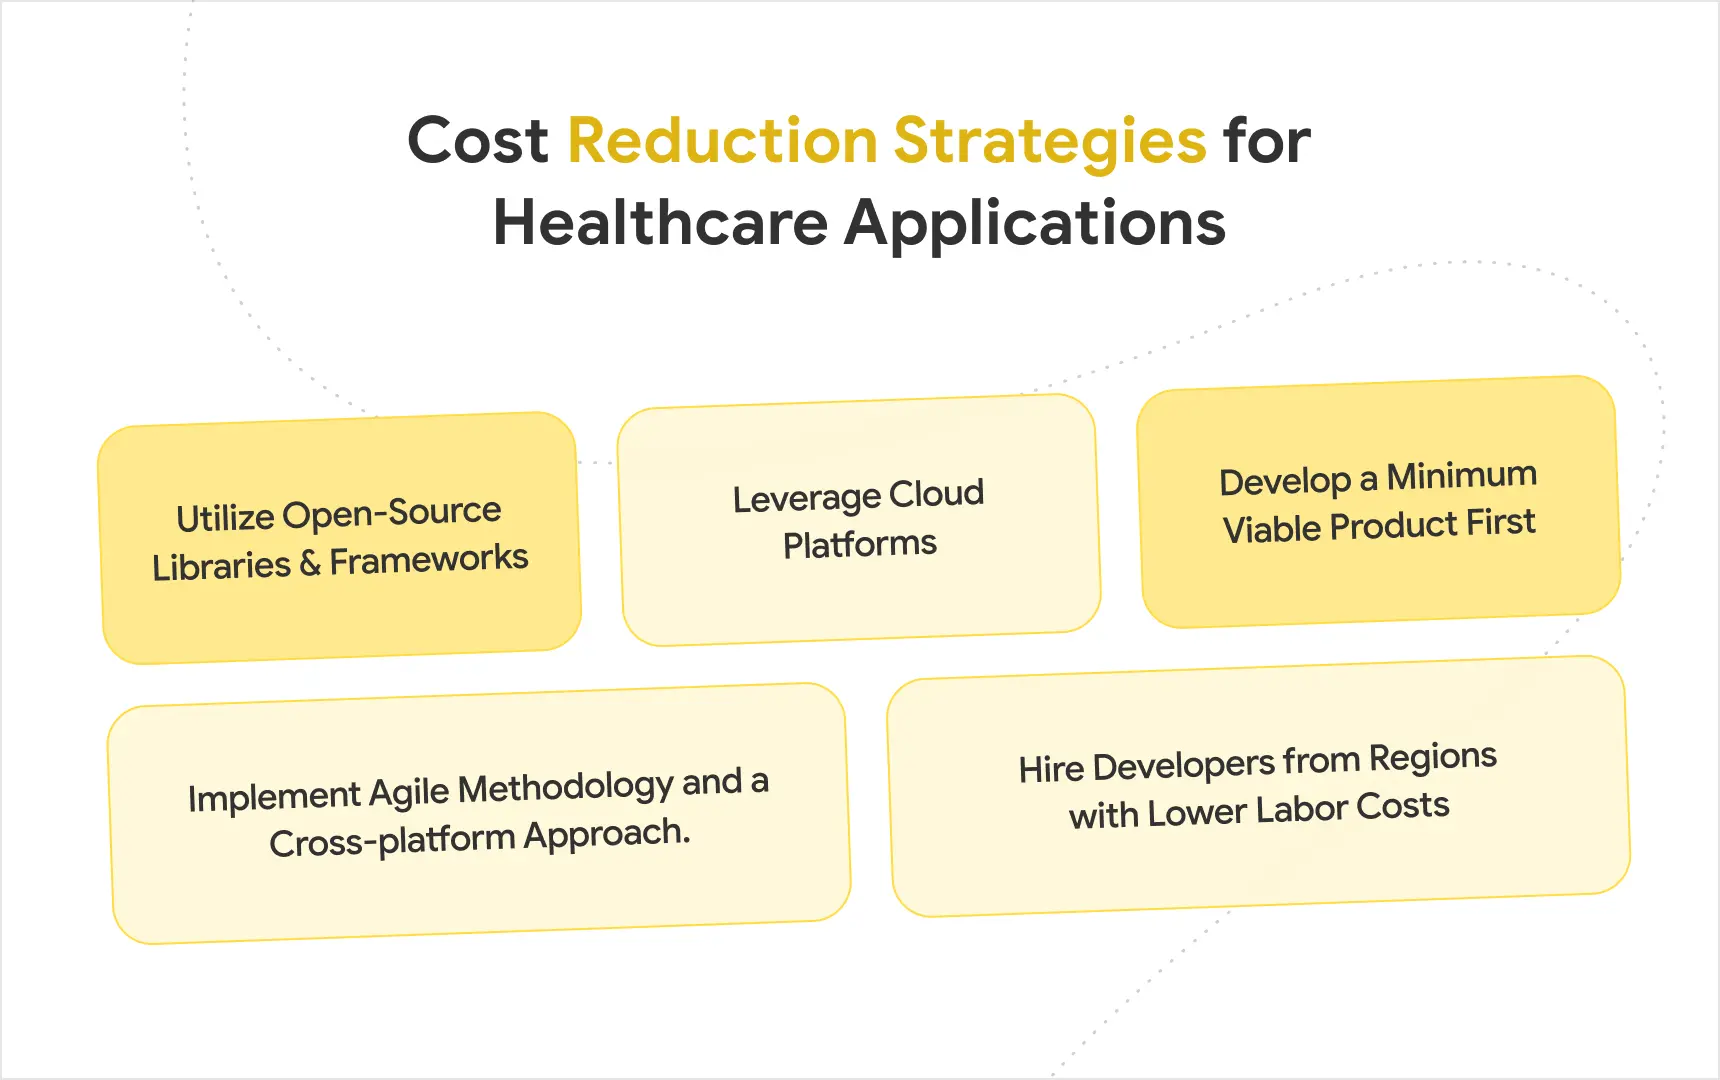 Cost Reduction Strategies for Healthcare Applications.webp